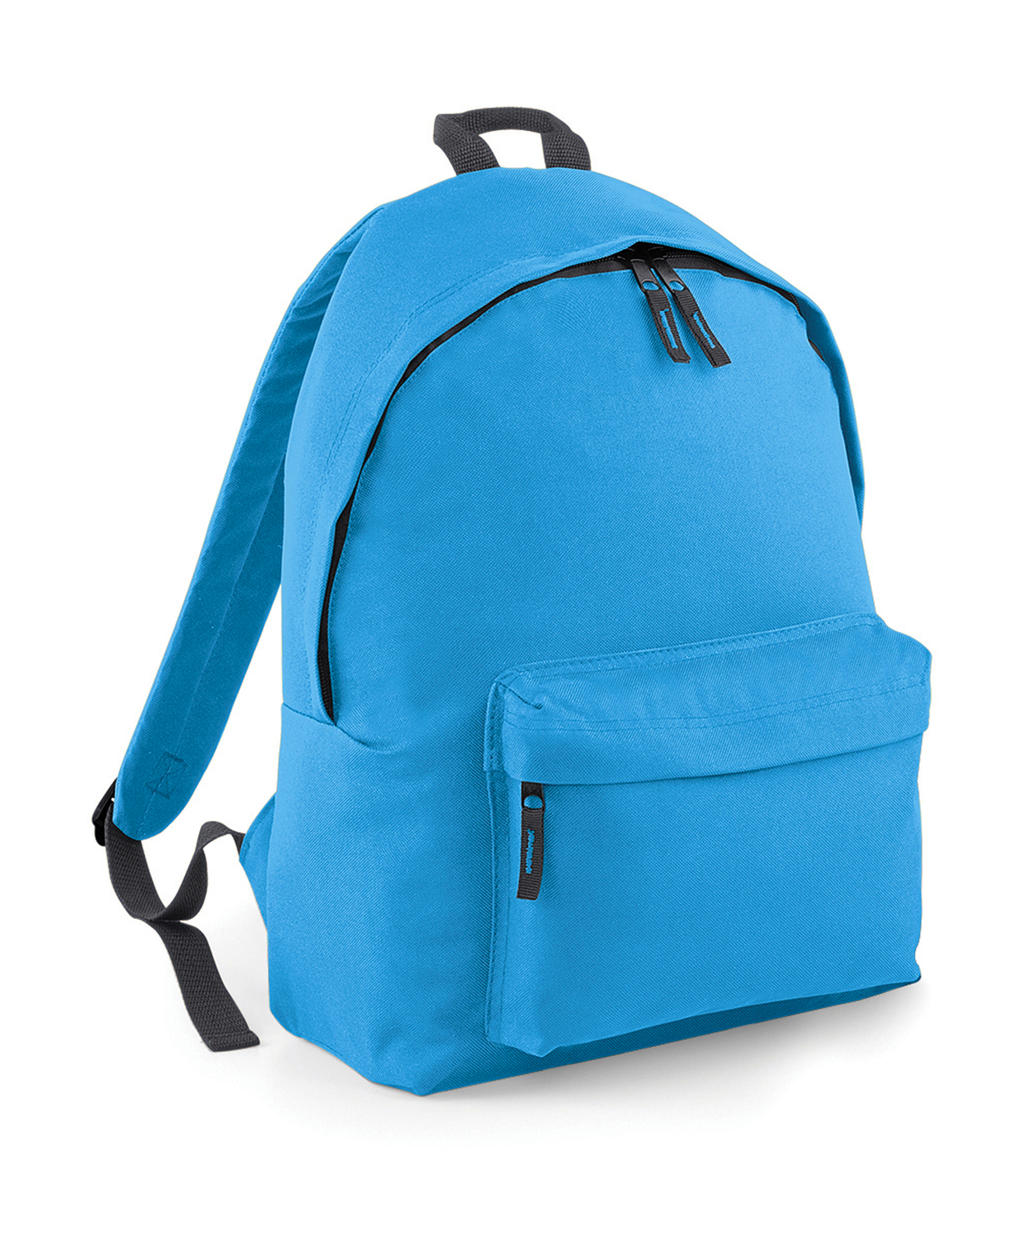  Original Fashion Backpack in Farbe Surf Blue/Graphite Grey